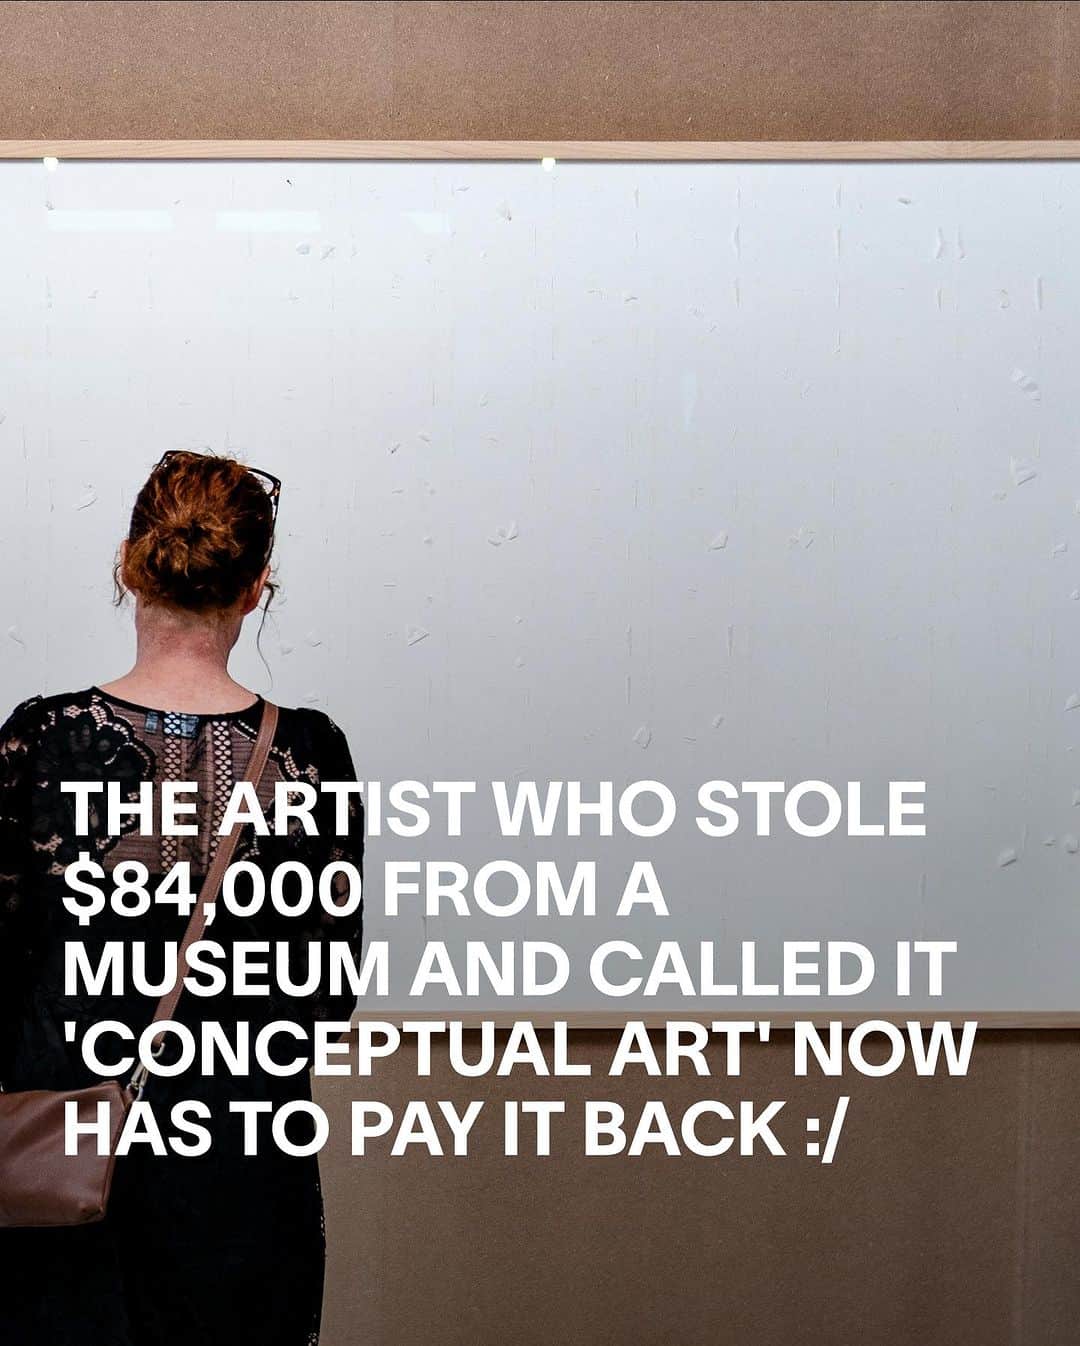 VICEのインスタグラム：「Two years ago, Danish artist Jens Haaning was lent $84,000 to recreate earlier works that represented average incomes as real banknotes. Instead, Haaning pocketed the money and presented empty glass frames, with the title "Take the Money and Run".  Now, the museum is asking for the money back.   The museum in question, Kunsten Museum of Modern Art, did display the artworks – but when Haaning refused to return the money, it took legal action.   At the time, Lasse Andersson, director of the Kunsten museum, said they were not a wealthy museum: “We have to think carefully about how we spend our funds, and we don’t spend more than we can afford.” Speaking to a Danish radio, Haaning said the work was simply that: “The work is that I have taken their money. It’s not theft. It is breach of contract, and breach of contract is part of the work.”  Haaning added: “I encourage other people who have working conditions as miserable as mine to do the same. If they’re sitting in some shitty job and not getting paid, and are actually being asked to pay money to go to work, then grab what you can and beat it.”」